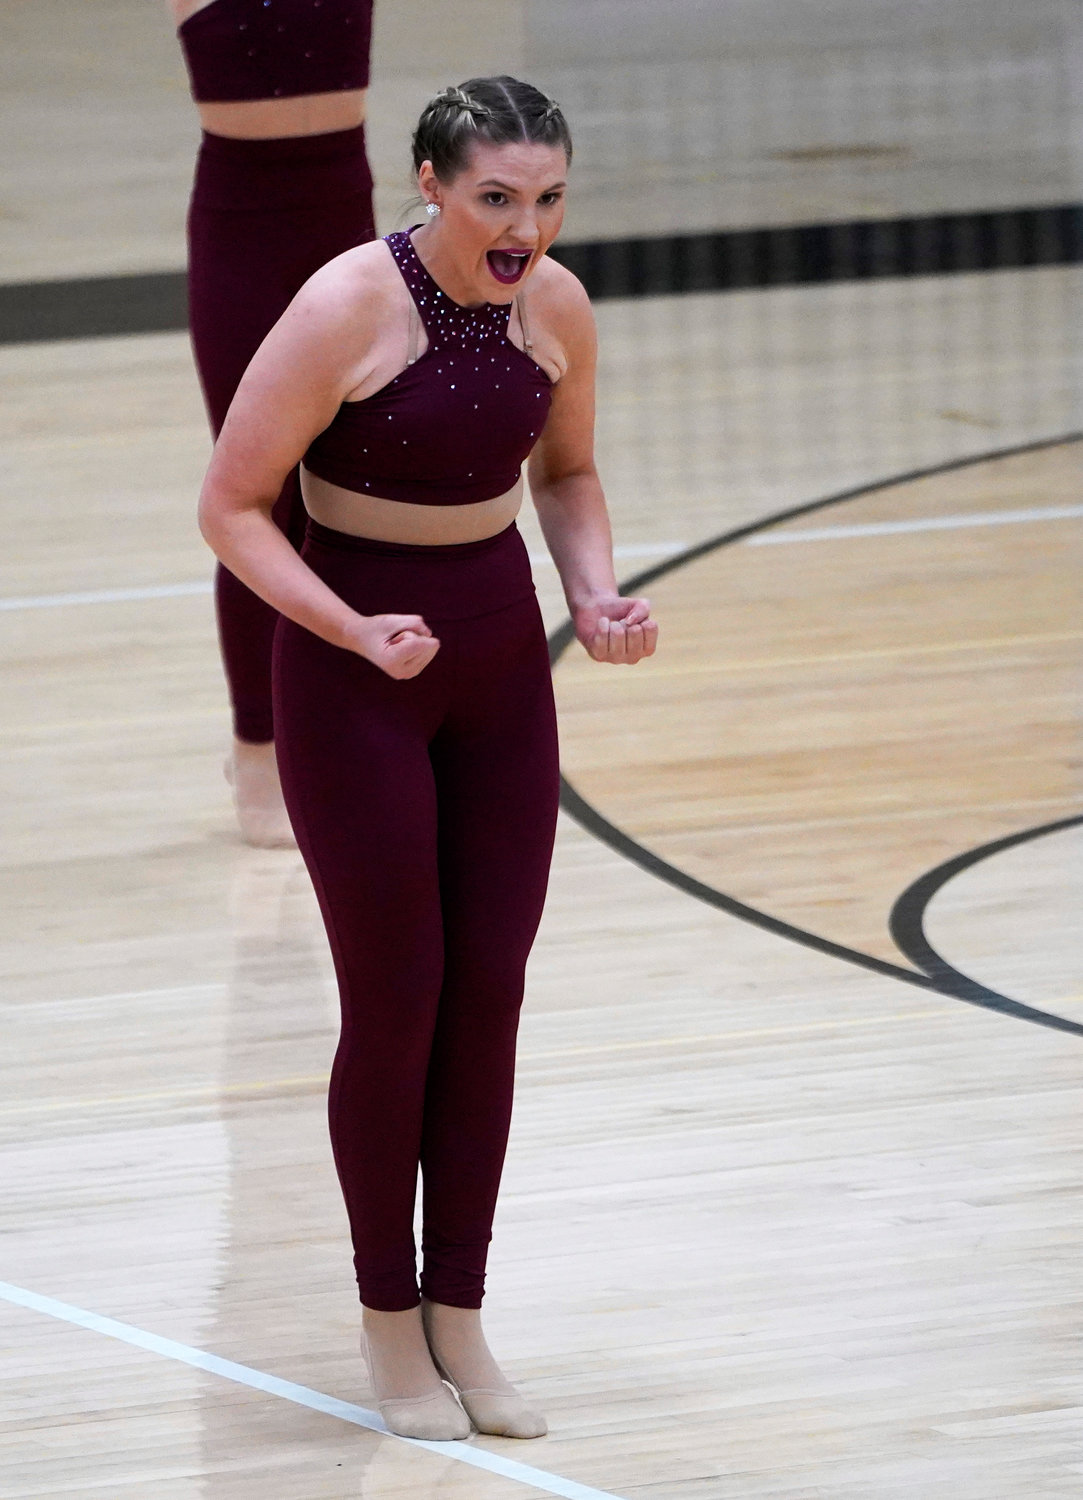 The Mid-Prairie dance team held a rehearsal of their state competition routines on Monday night at Mid-Prairie High School.